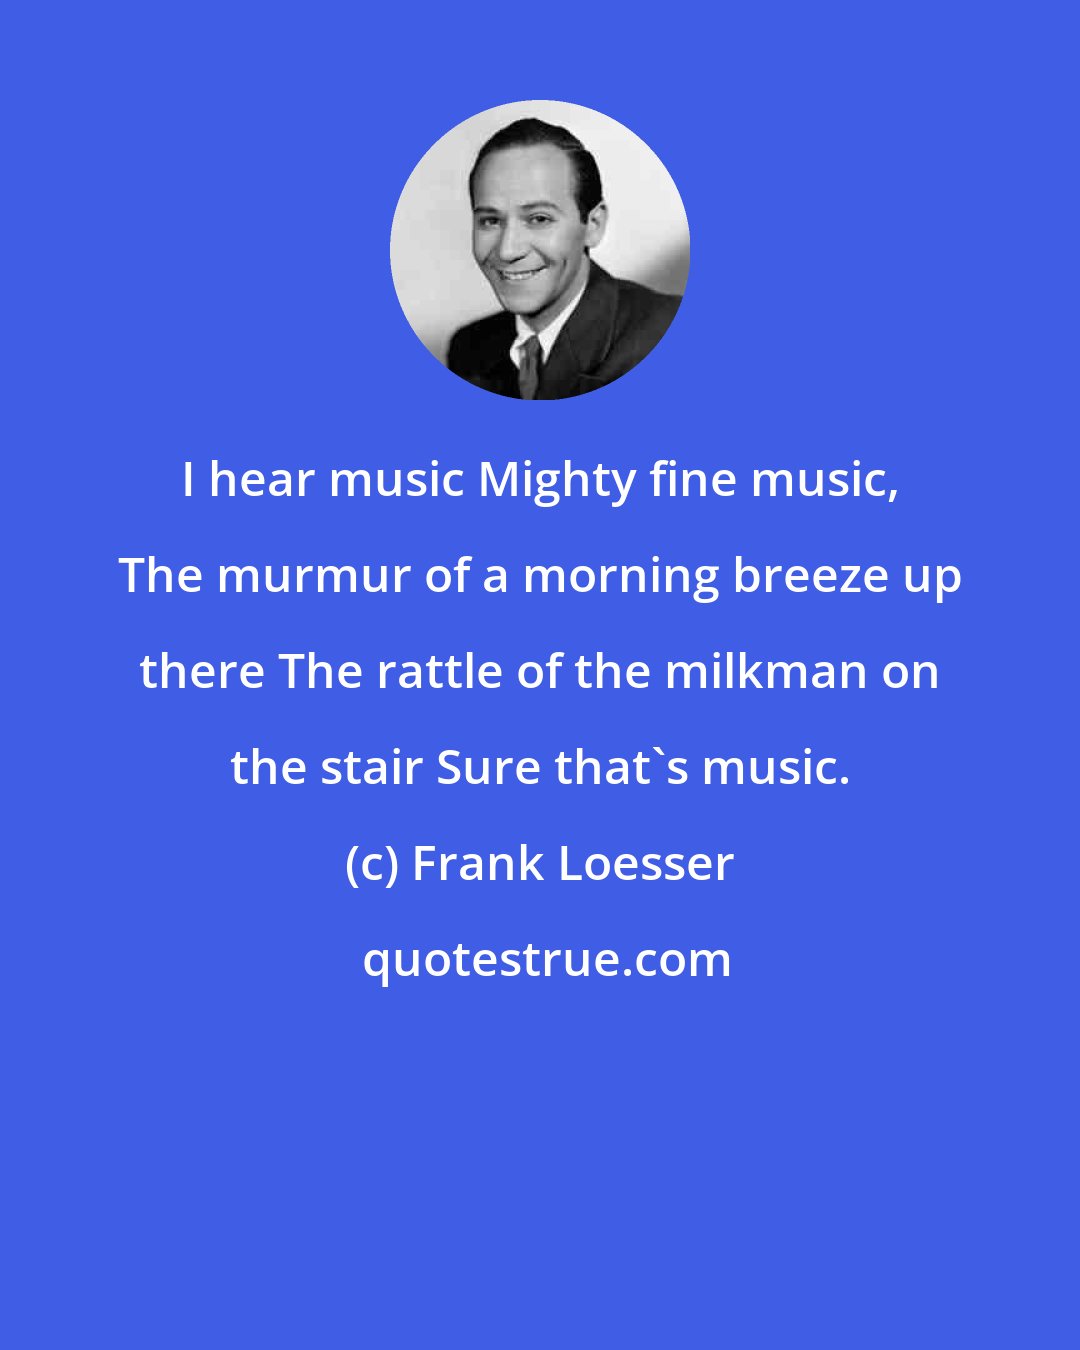 Frank Loesser: I hear music Mighty fine music, The murmur of a morning breeze up there The rattle of the milkman on the stair Sure that's music.